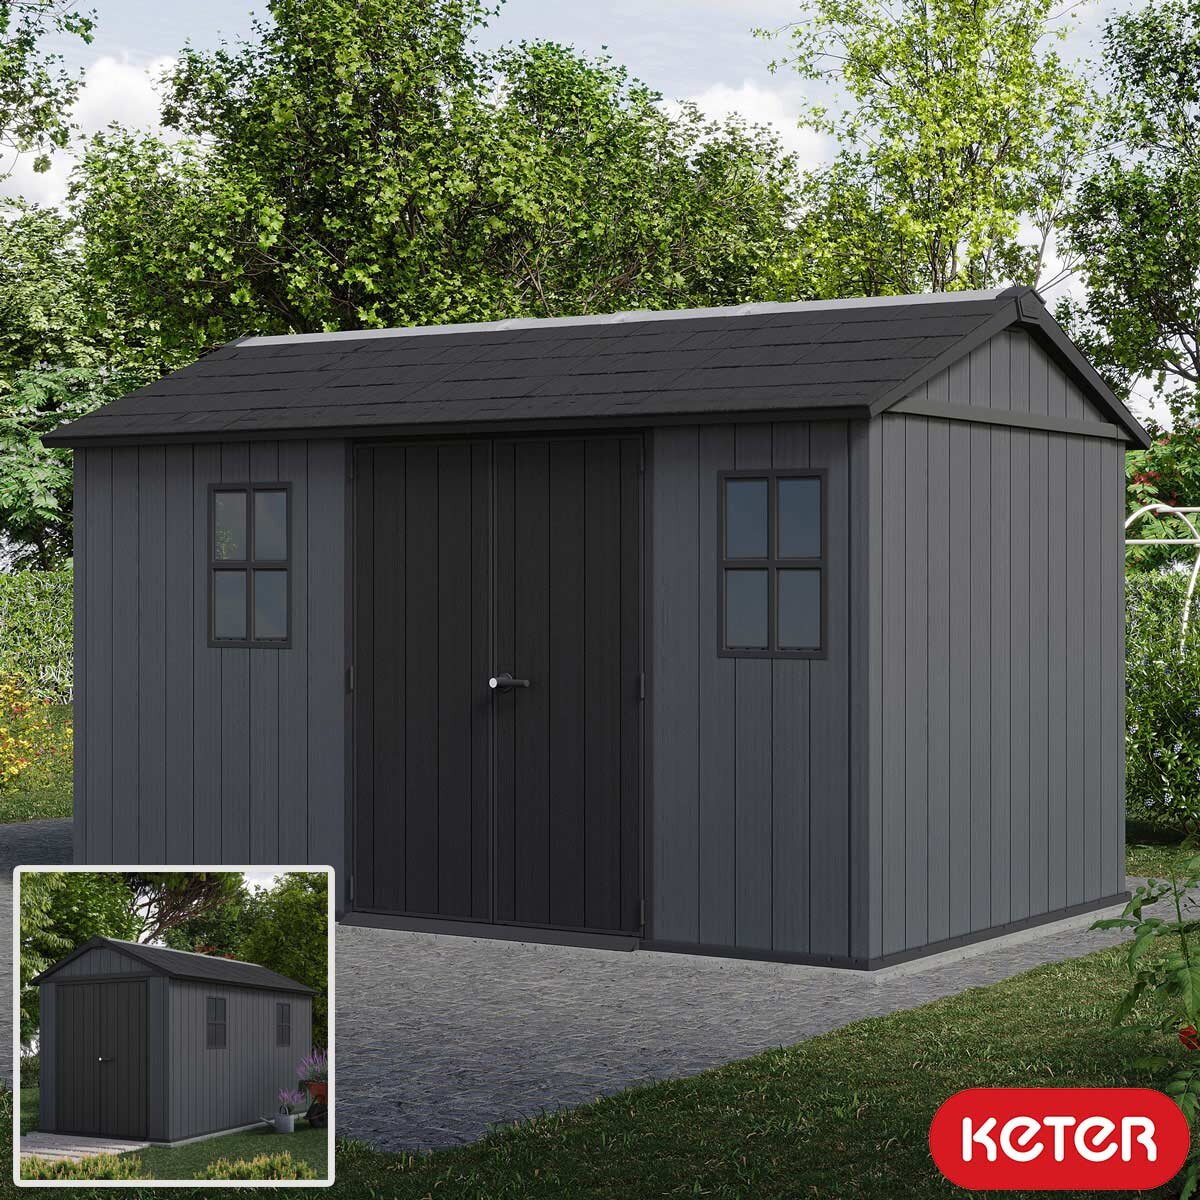 Keter Newton Plus 13ft 5" x 7ft 6" (4.1 x 2.3m) Storage Shed in 2 Configurations